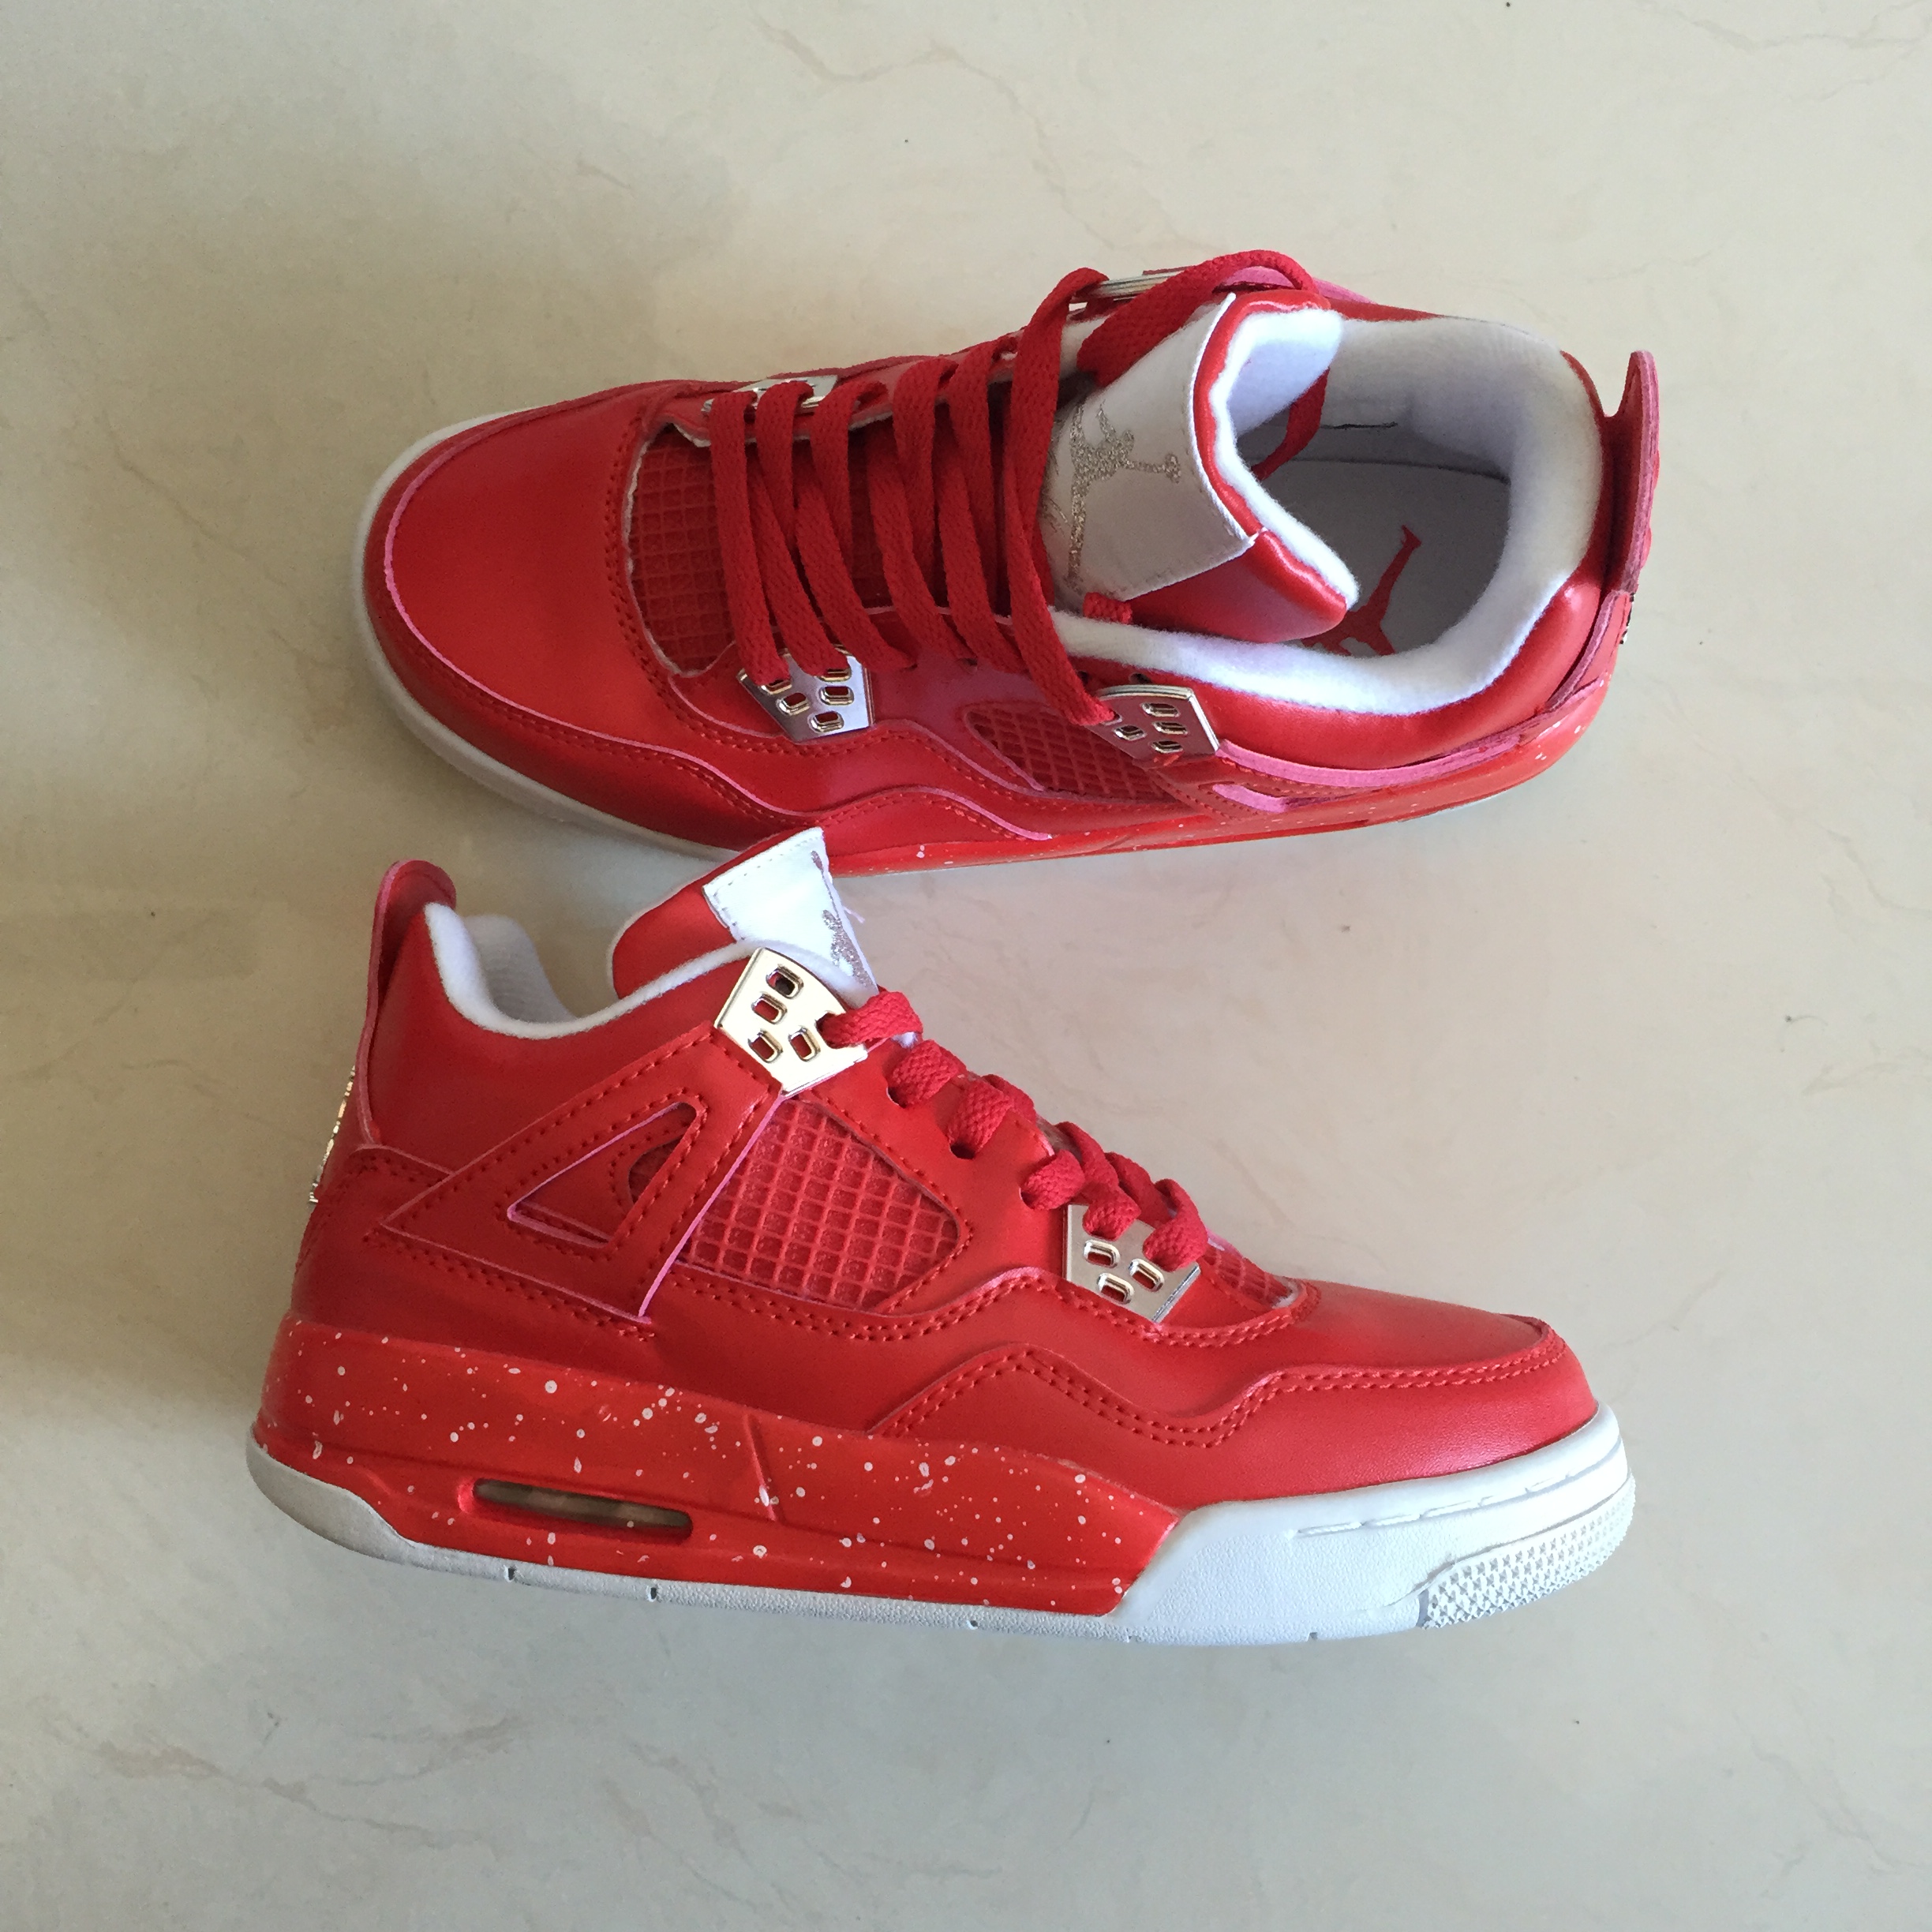 New Air Jordan 4 Spray Point All Red Shoes